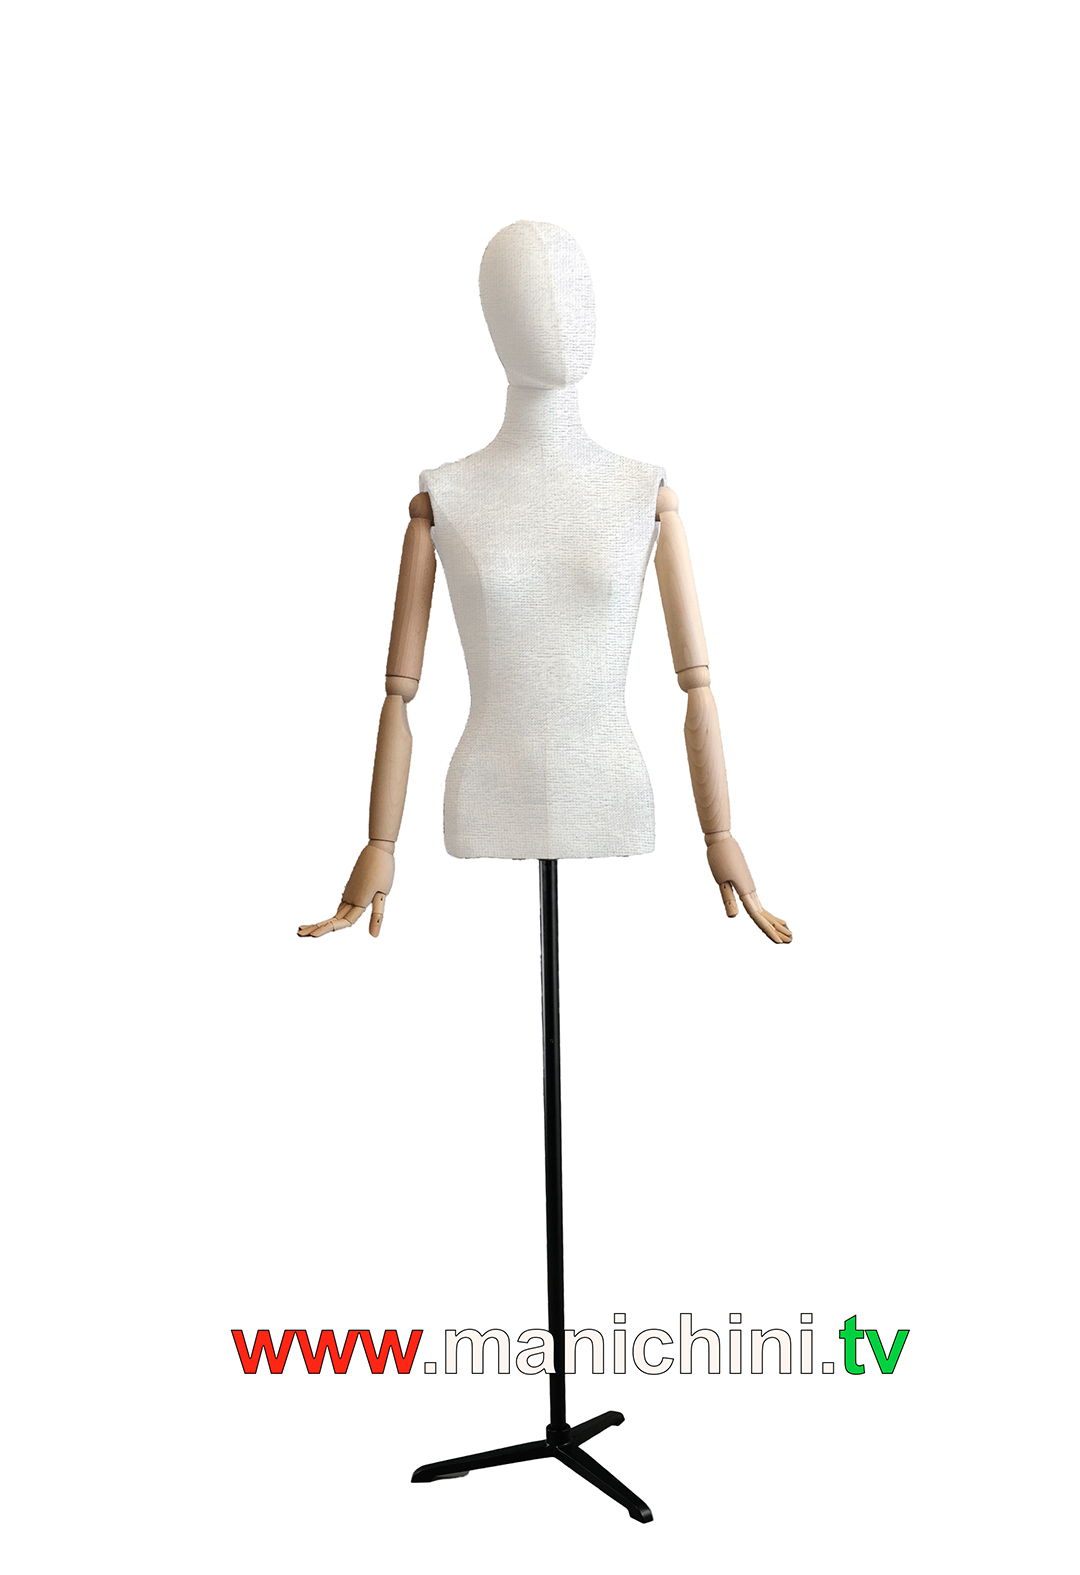 Velvet Upholstered Busts Bust Woman Tailored White Wooden Arms with Head